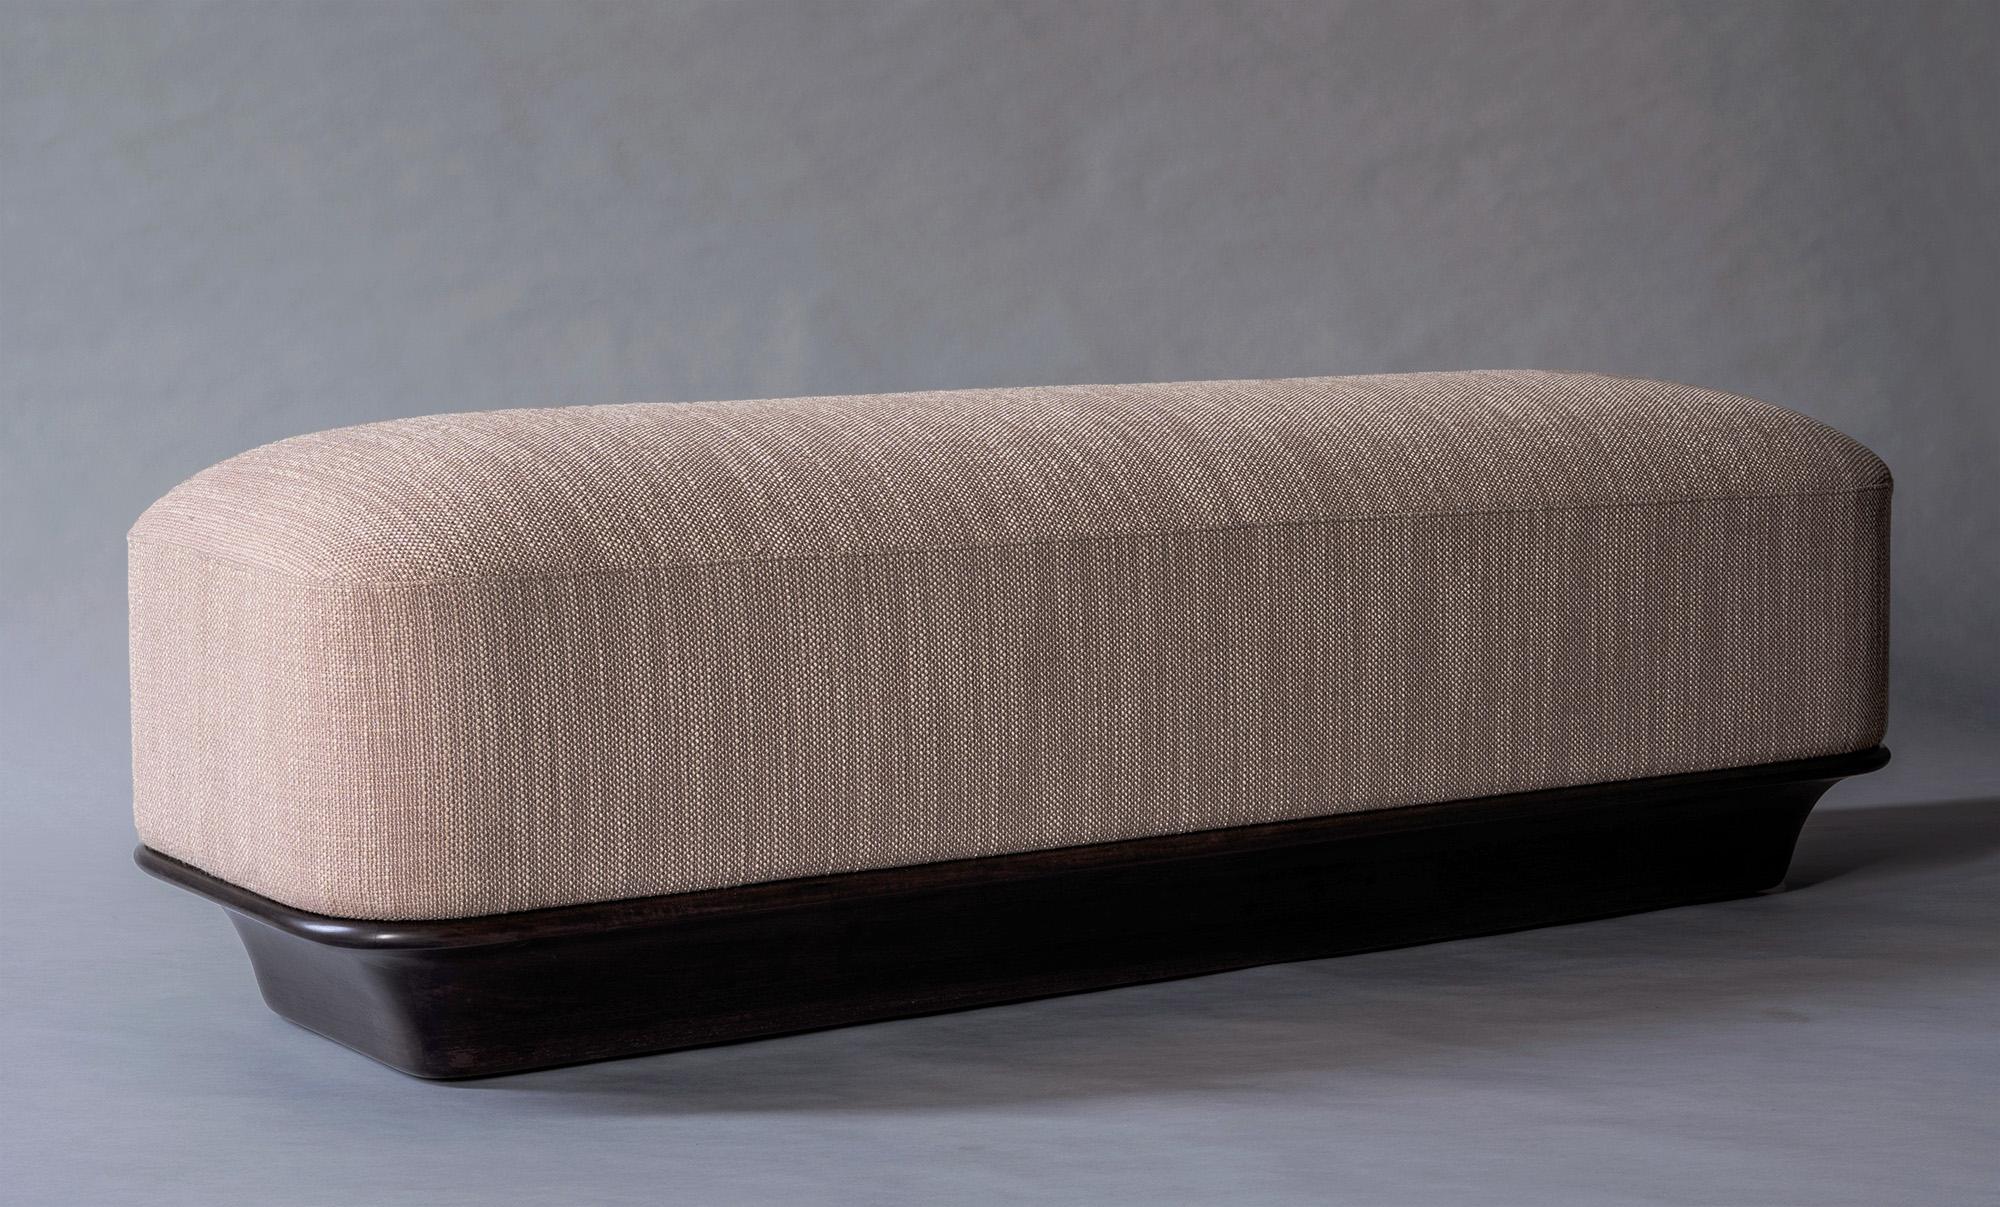 The Nico Bench combines handsome proportions with timeless materials and an emphasis on comfort. Straight lines are tempered by curved edges, resulting in a thoughtful balance of hard and soft elements. Subtle decorative accents, such as the shapely